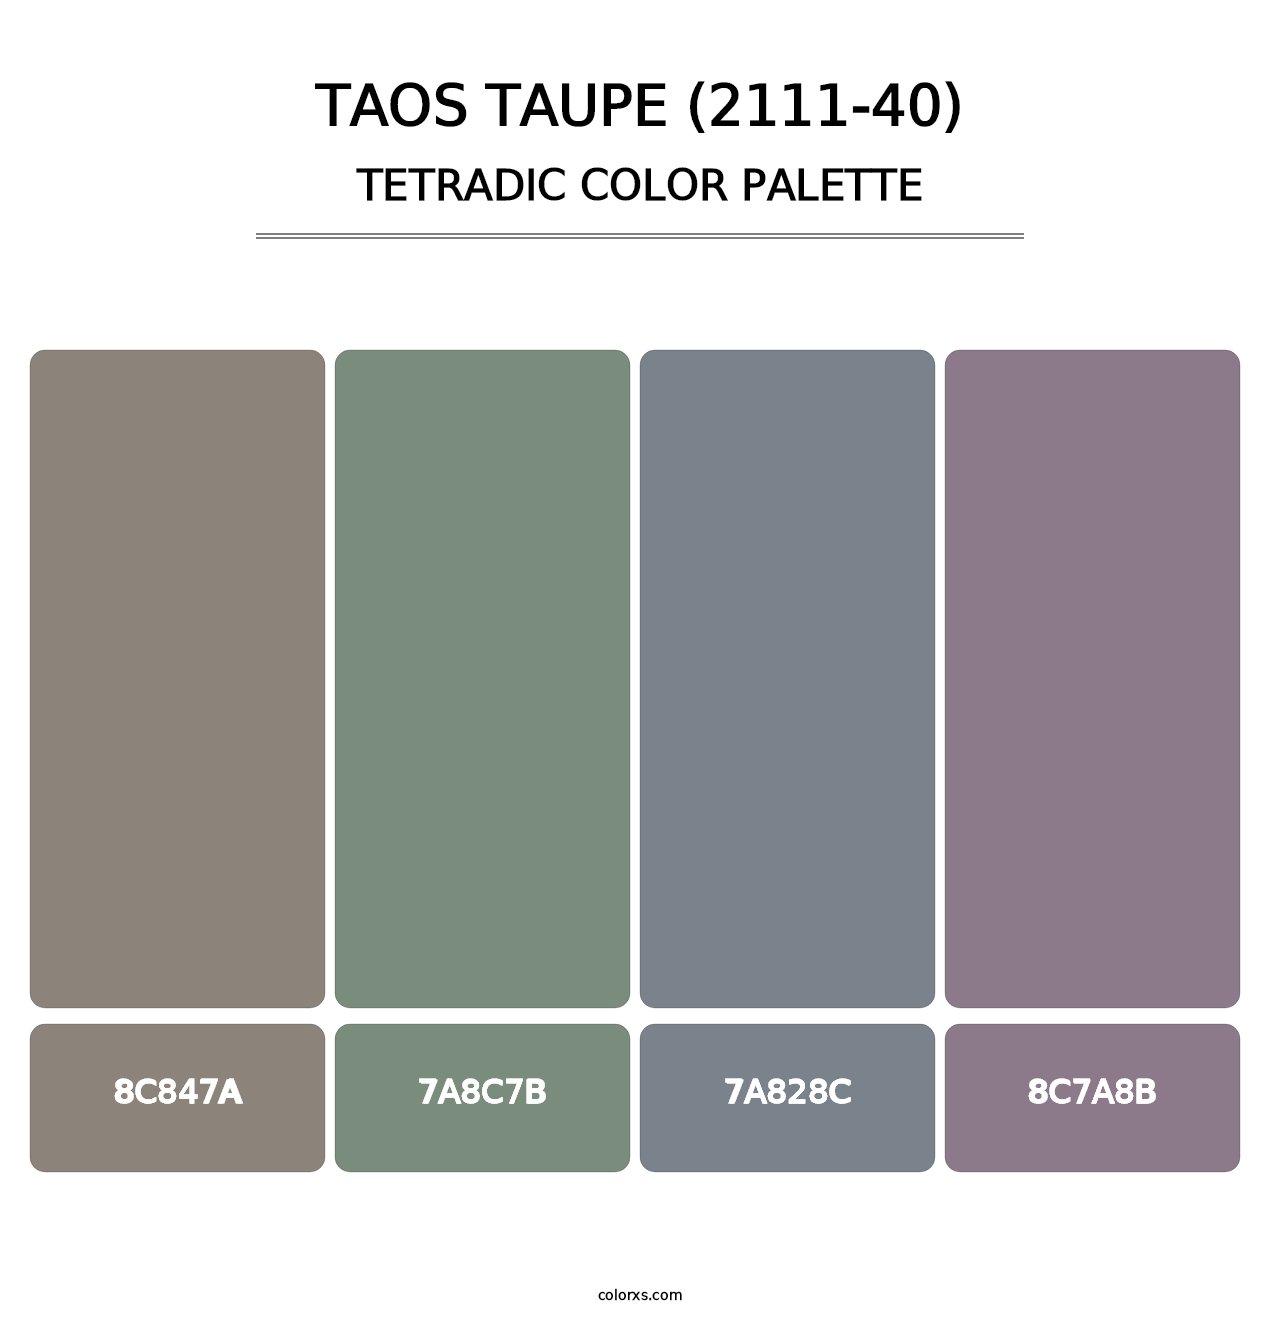 Taos Taupe (2111-40) - Tetradic Color Palette